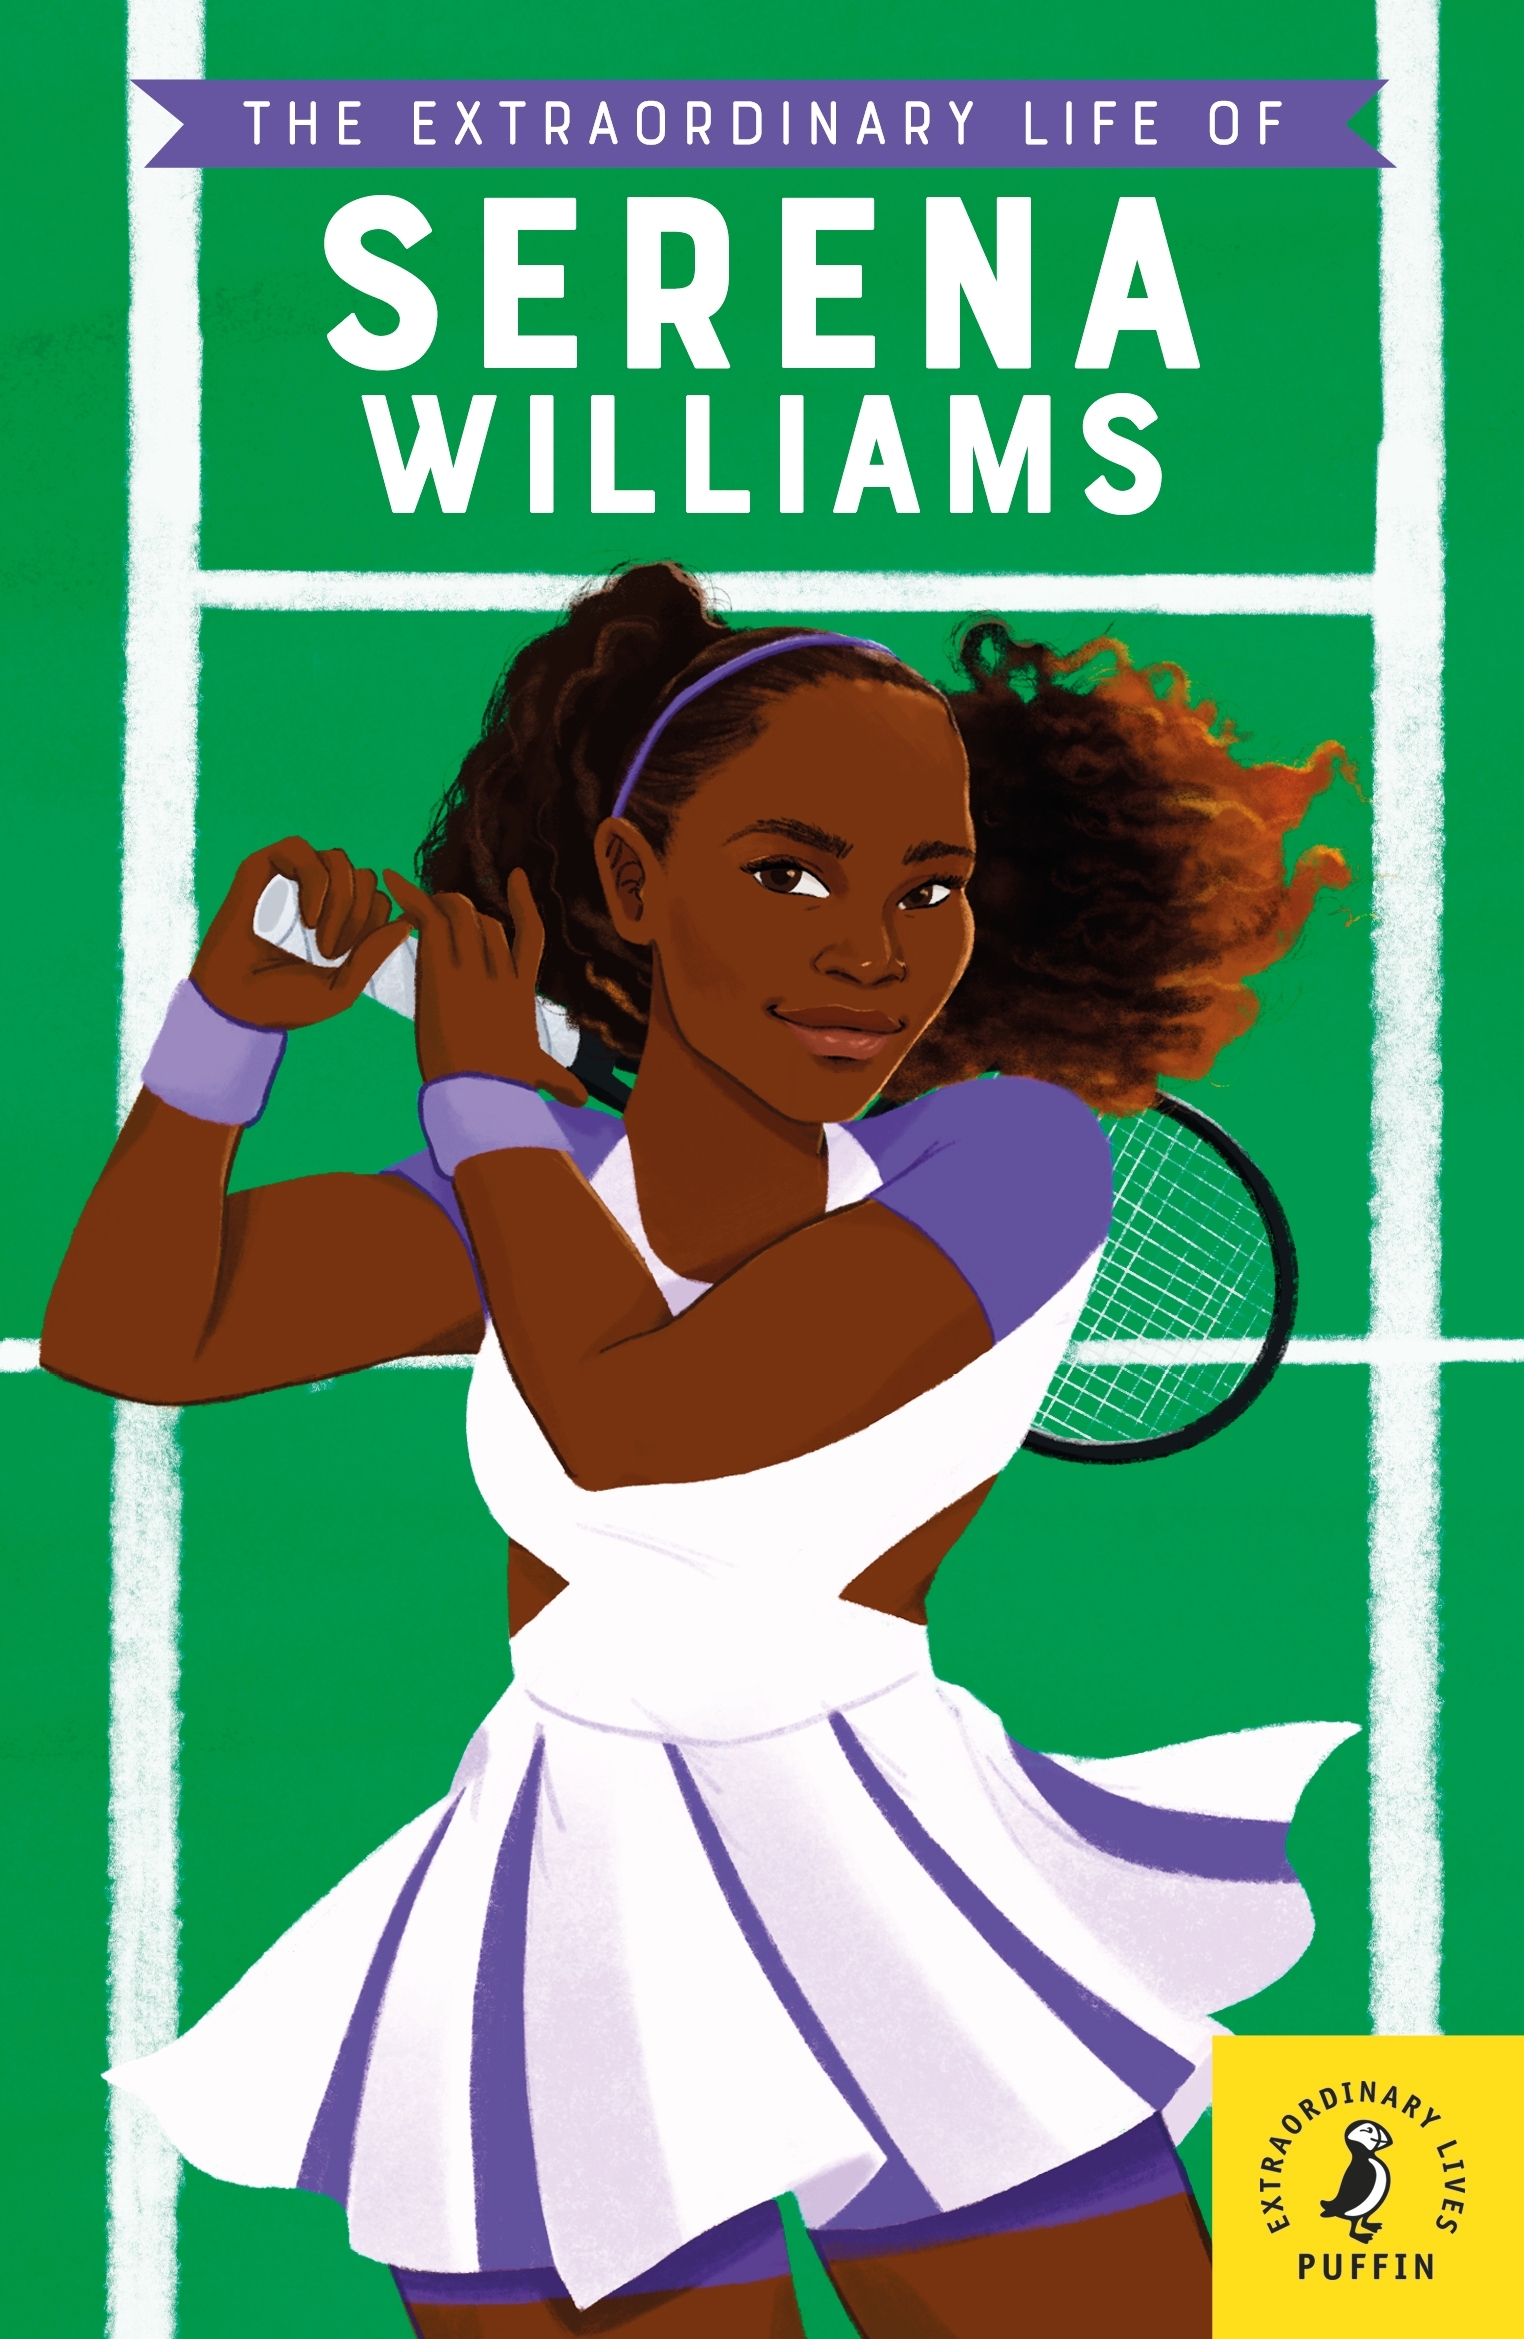 Serena Williams, Biography, Titles, & Facts